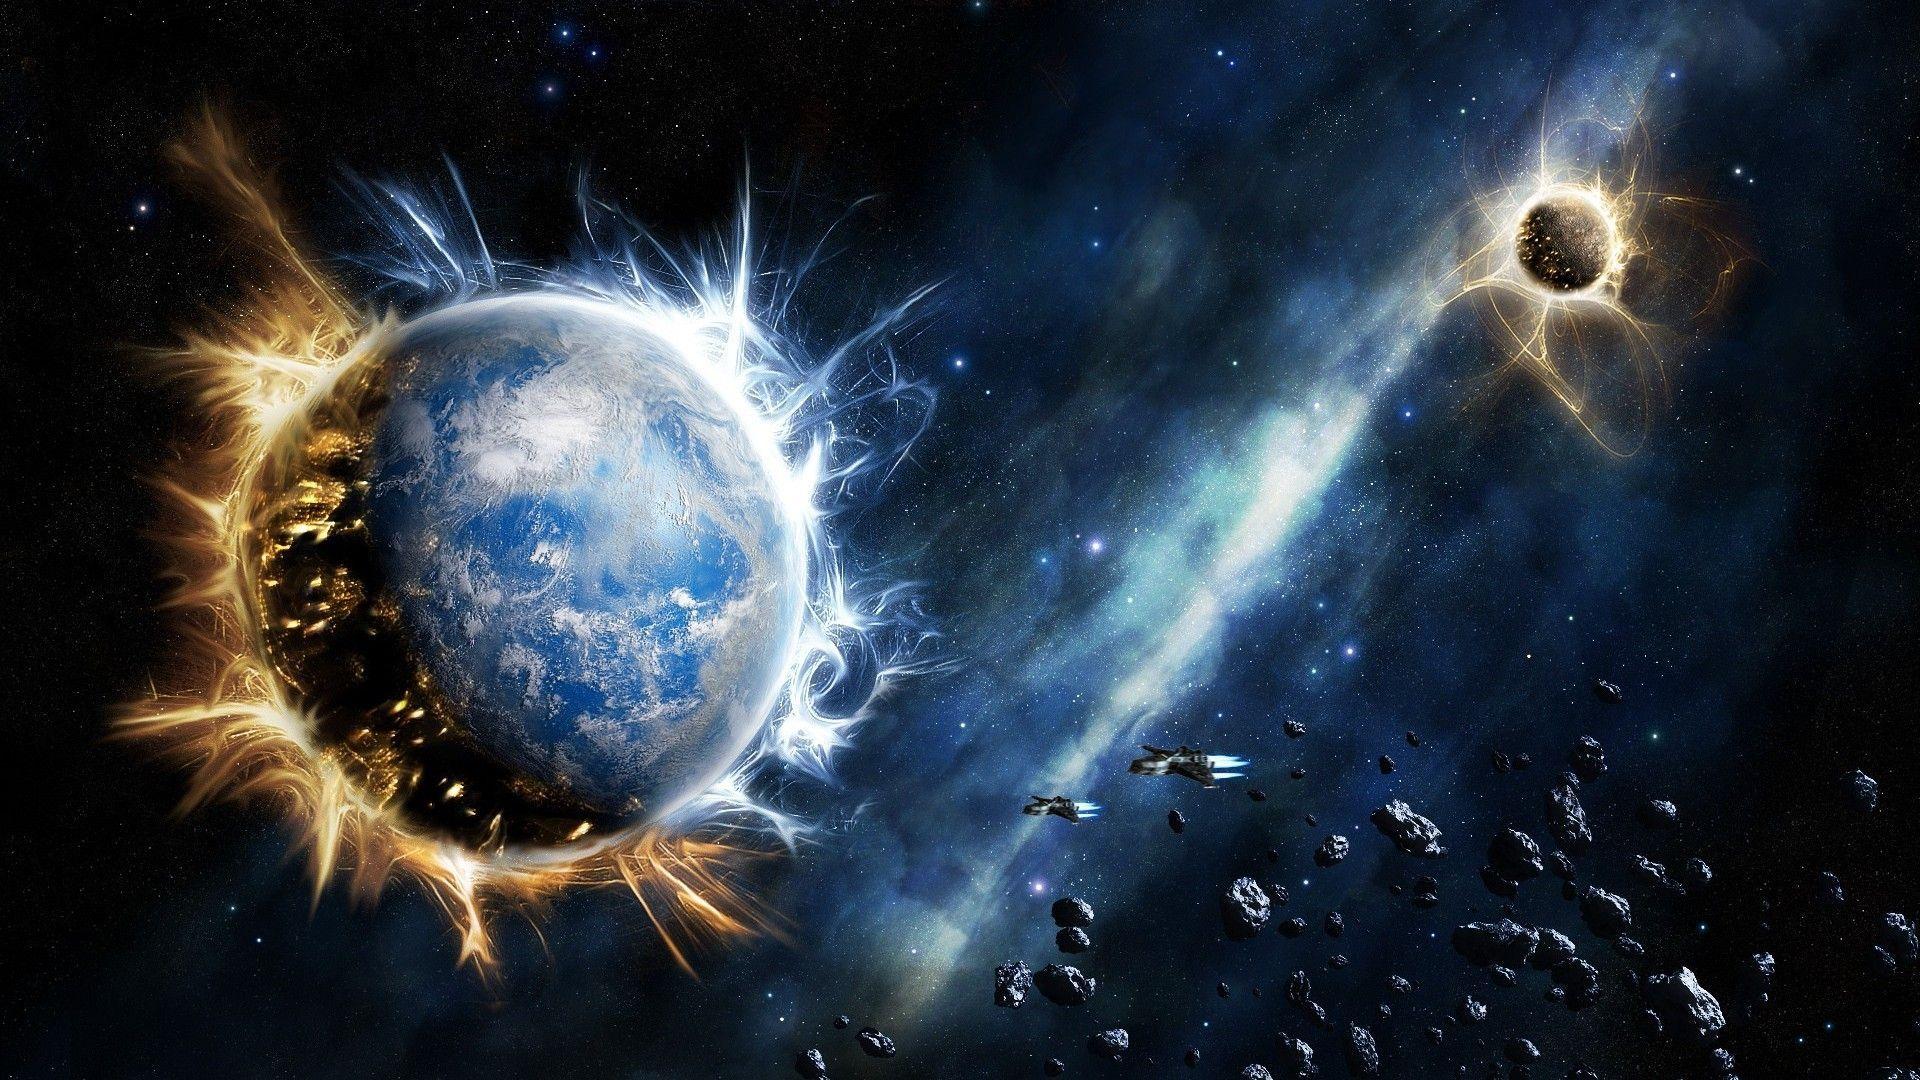 Link between #supernova remnants and cosmic rays confirmed